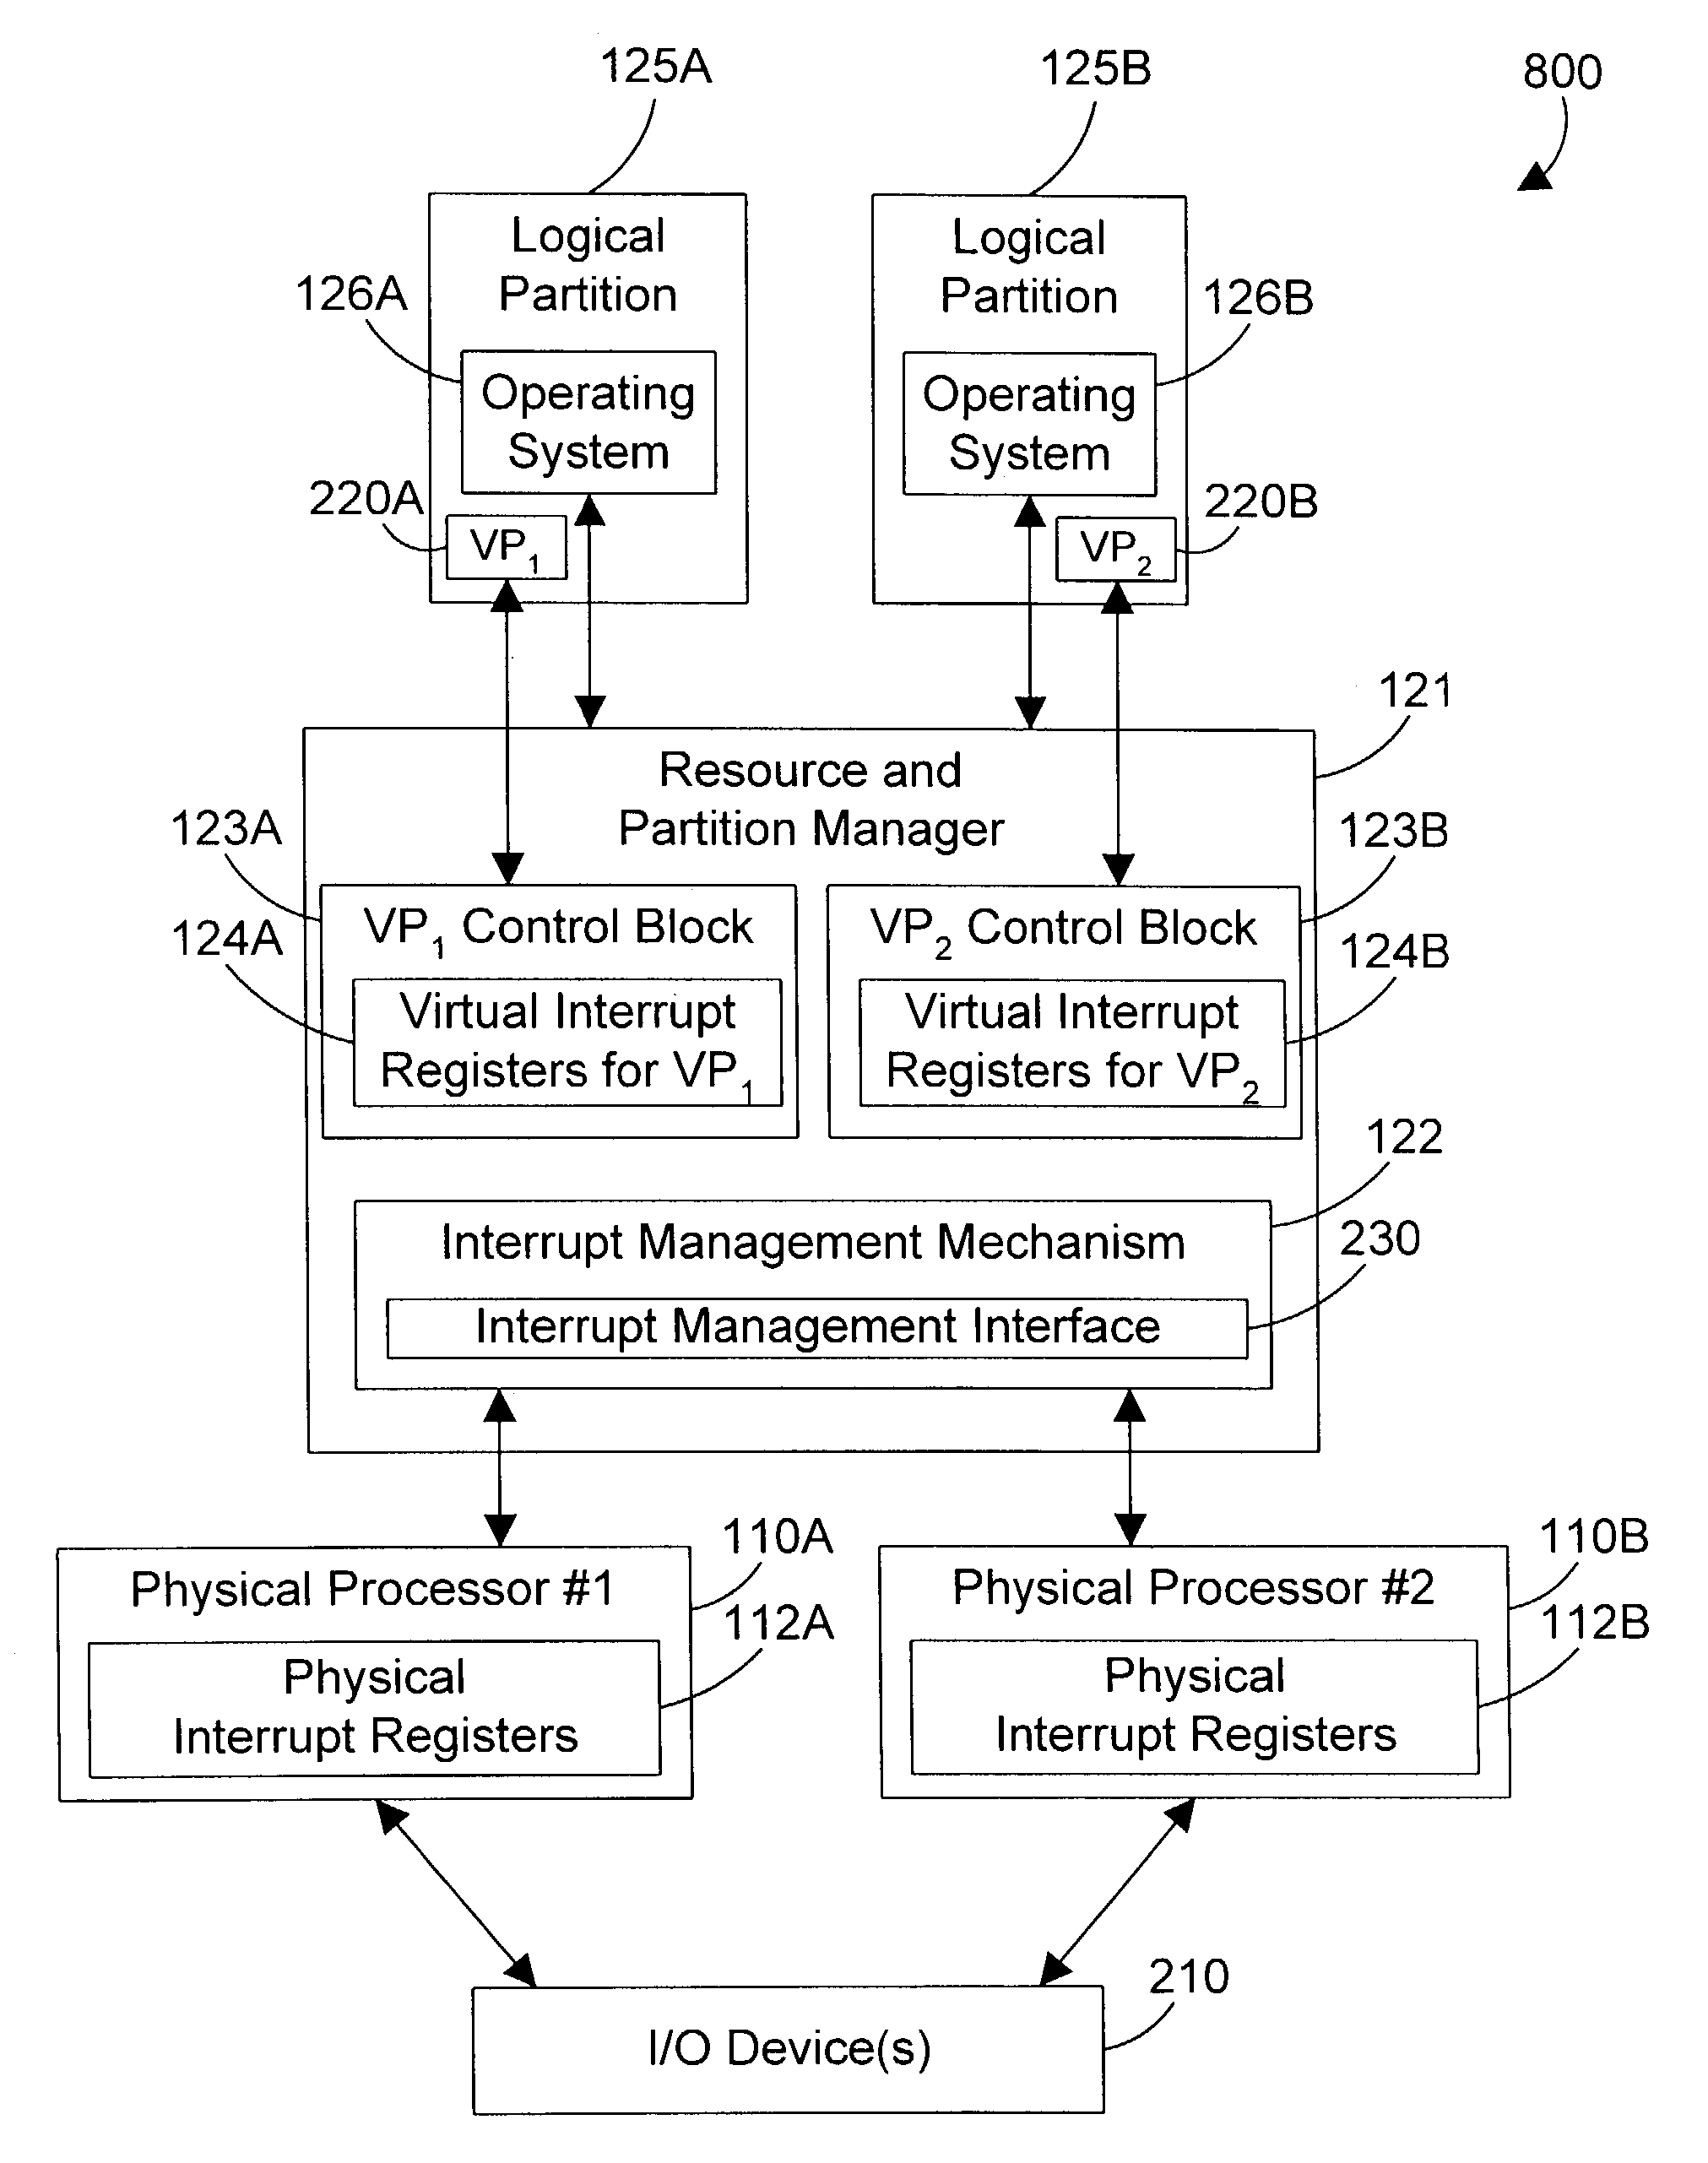 Apparatus and method for virtualizing interrupts in a logically partitioned computer system